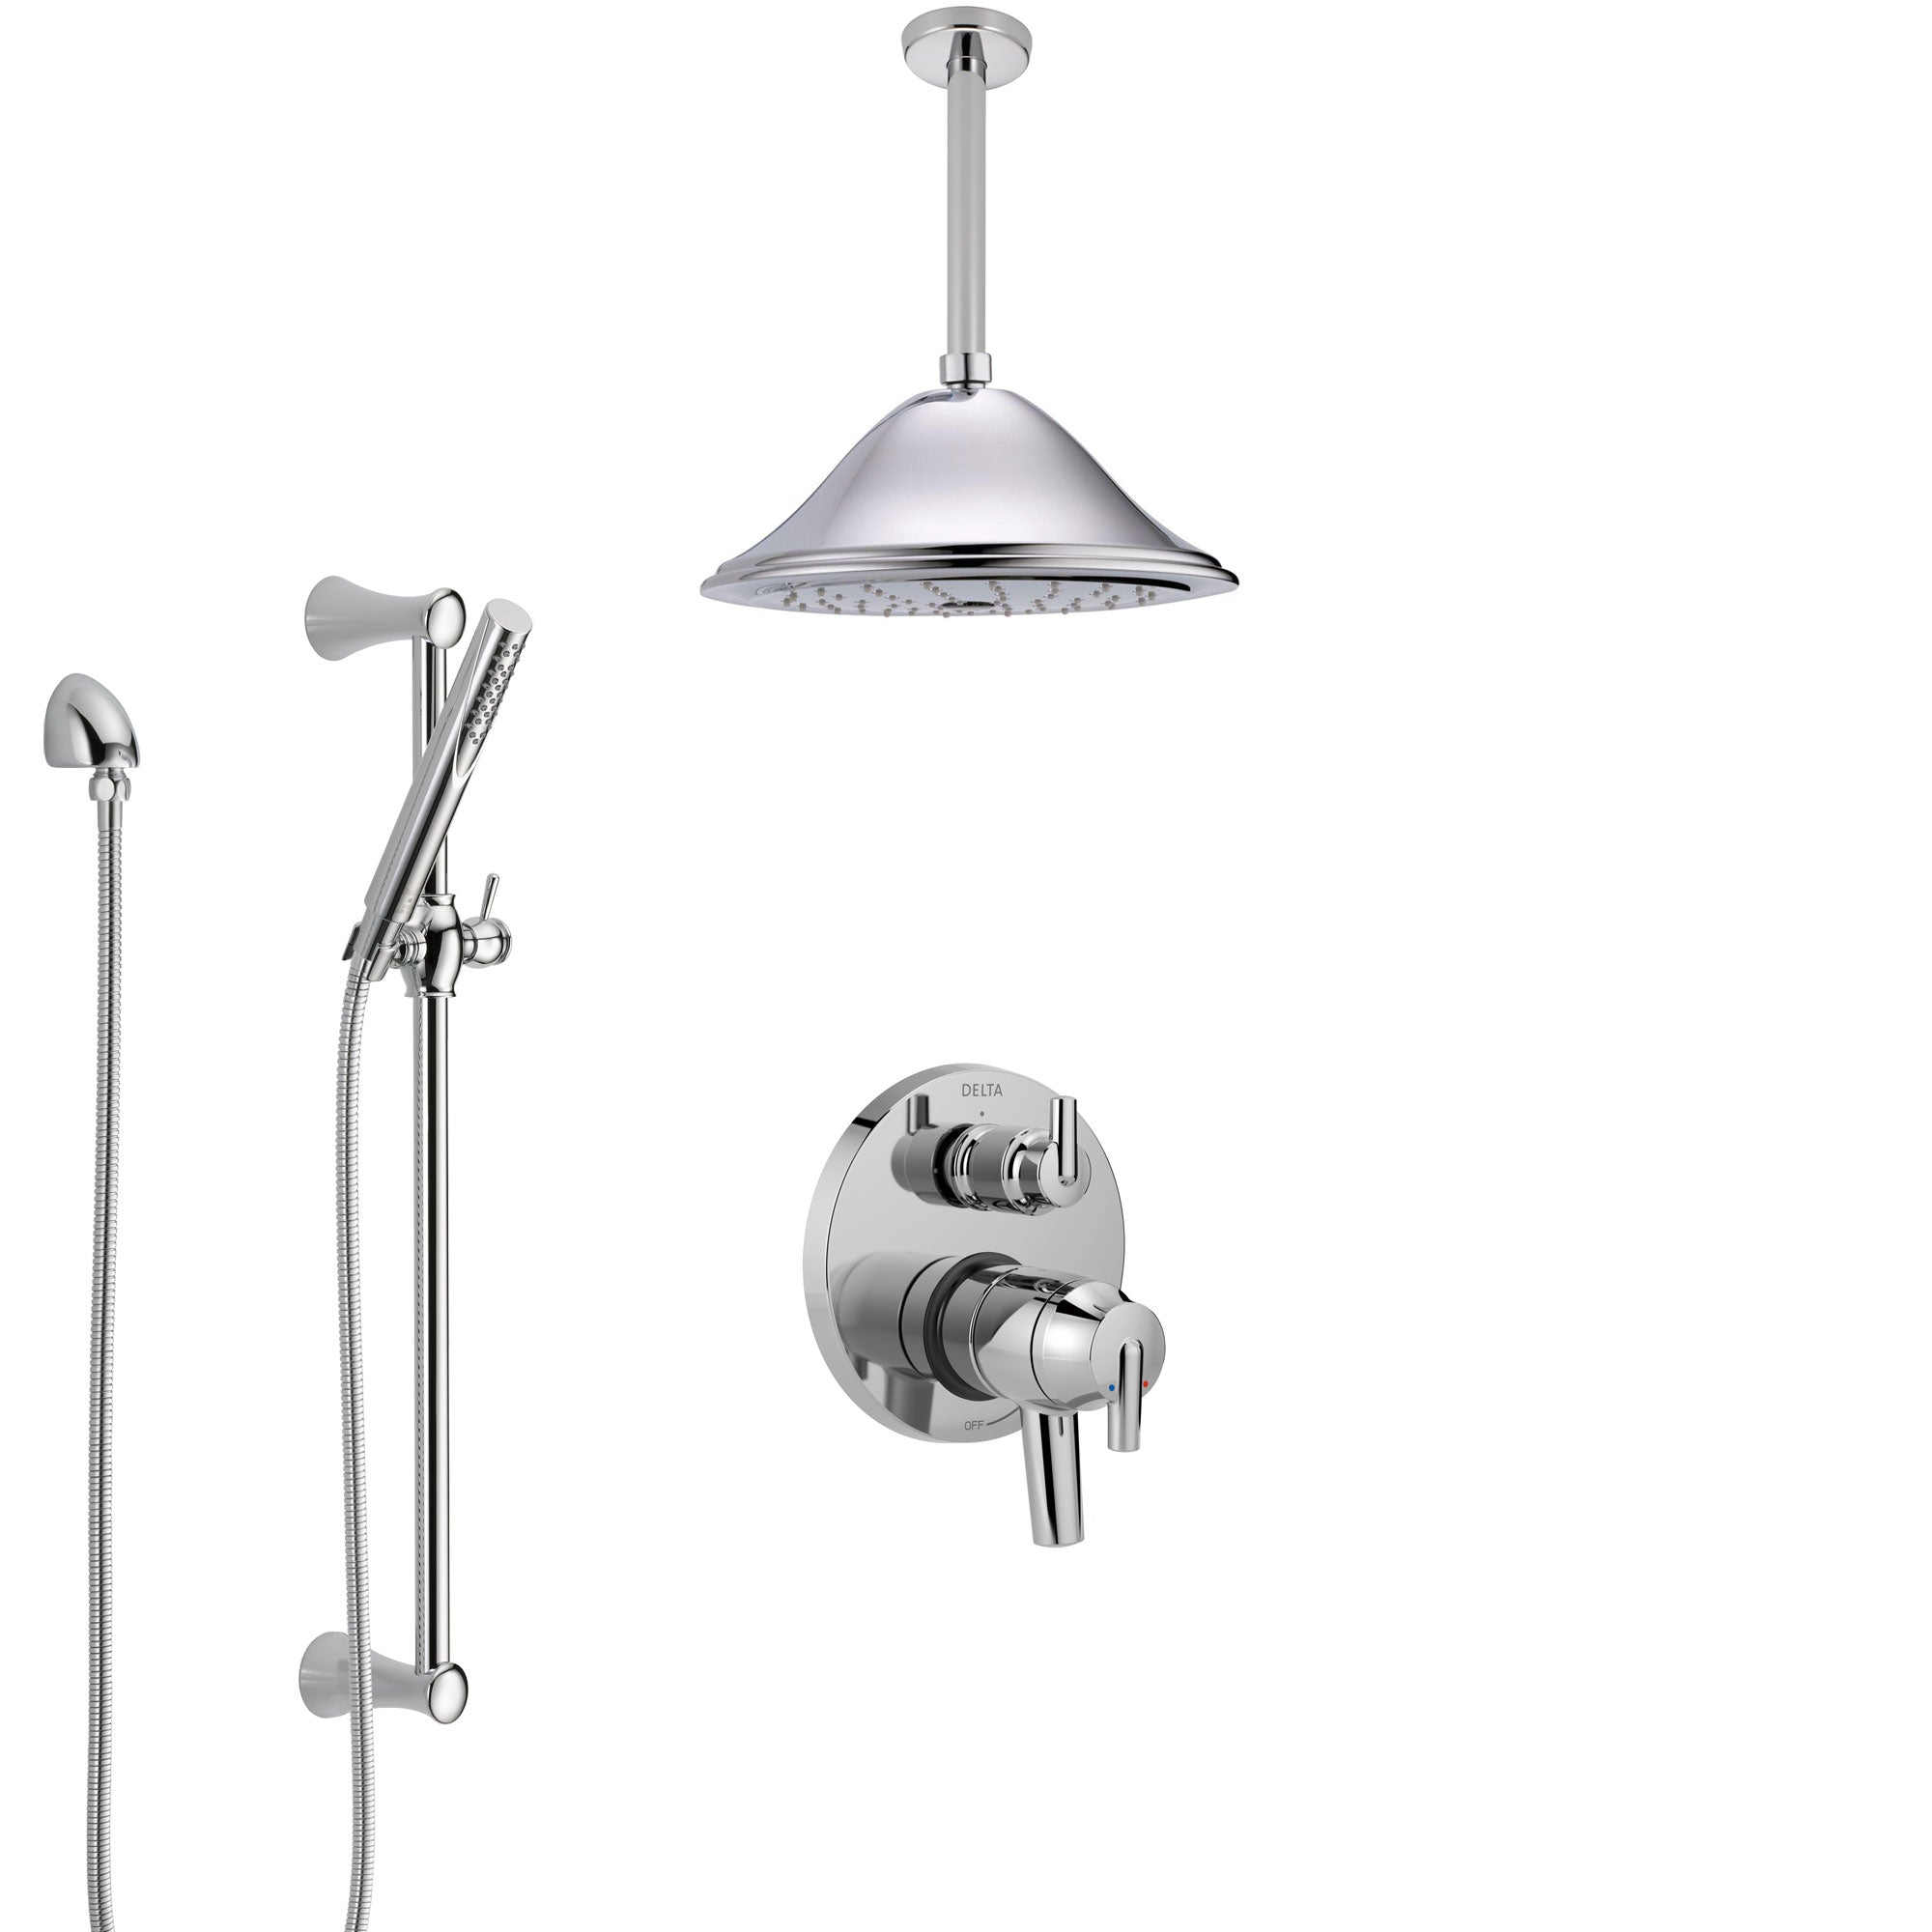 Delta Trinsic Chrome Finish Shower System with Dual Control Handle, Integrated Diverter, Ceiling Mount Showerhead, and Hand Shower SS278592